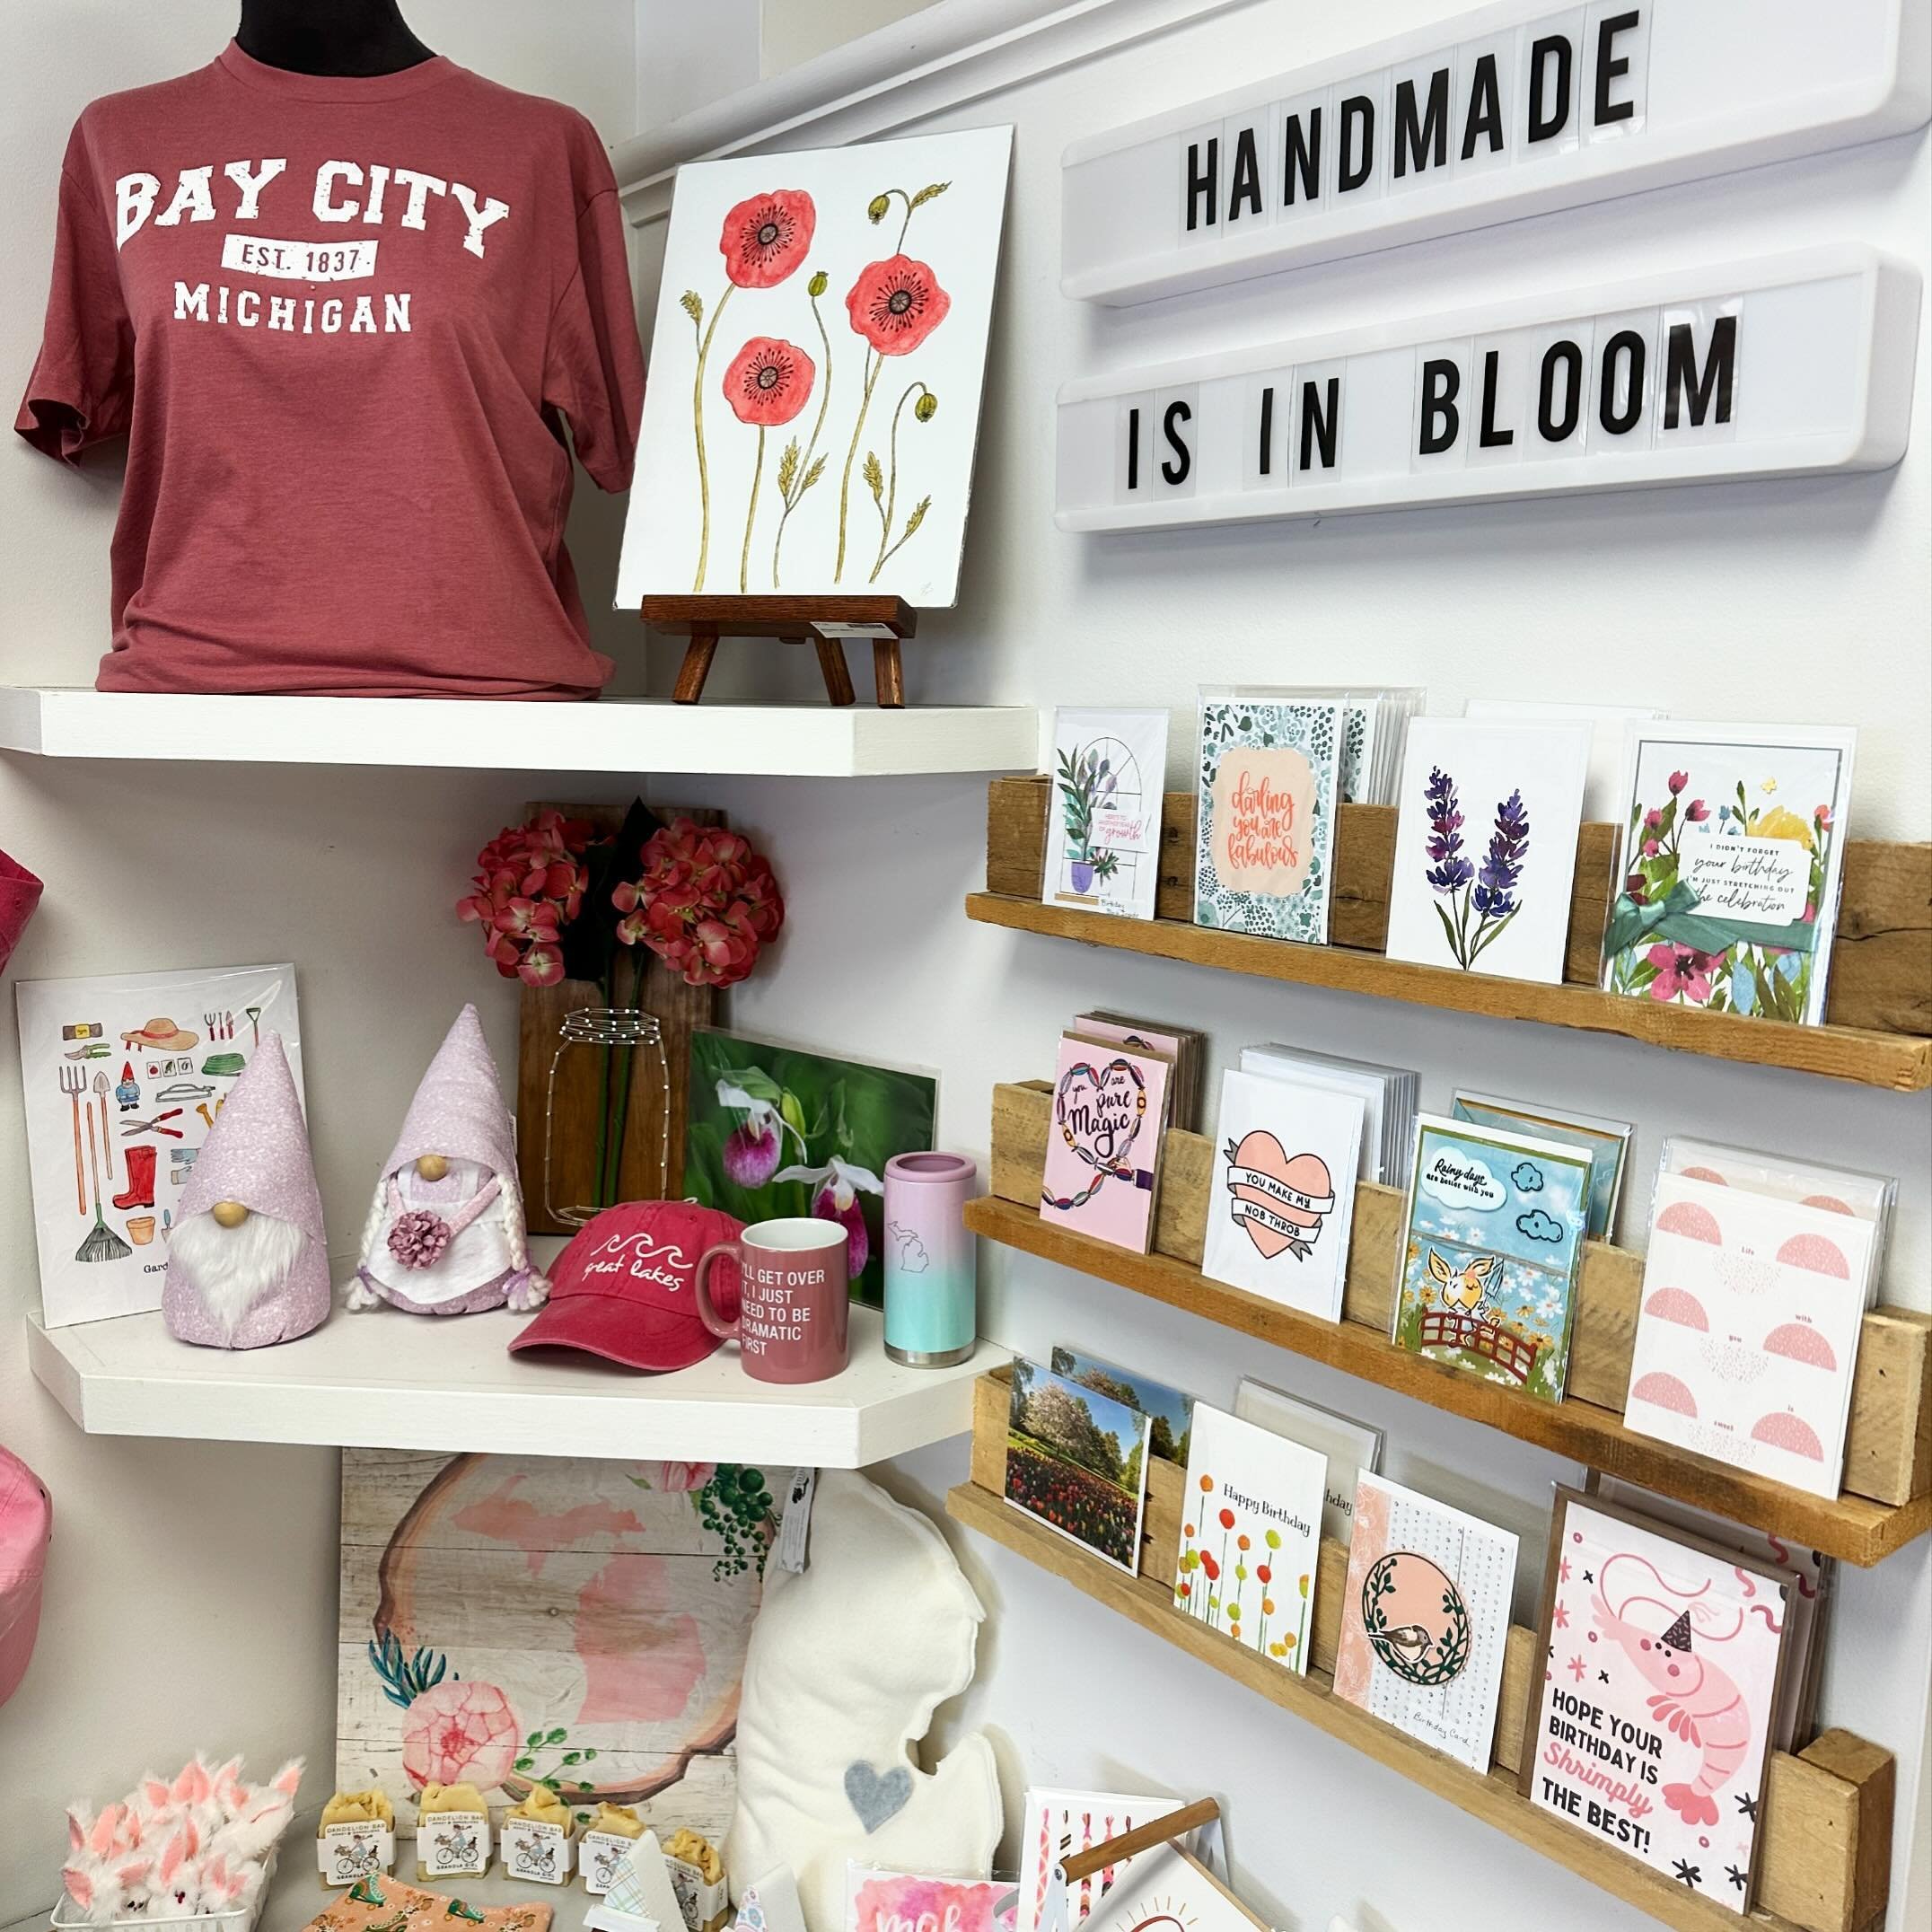 🌷 Sprint has sprung here at the shop! Stop in and grab a lovingly handmade item for yourself or a friend today from 11-5!